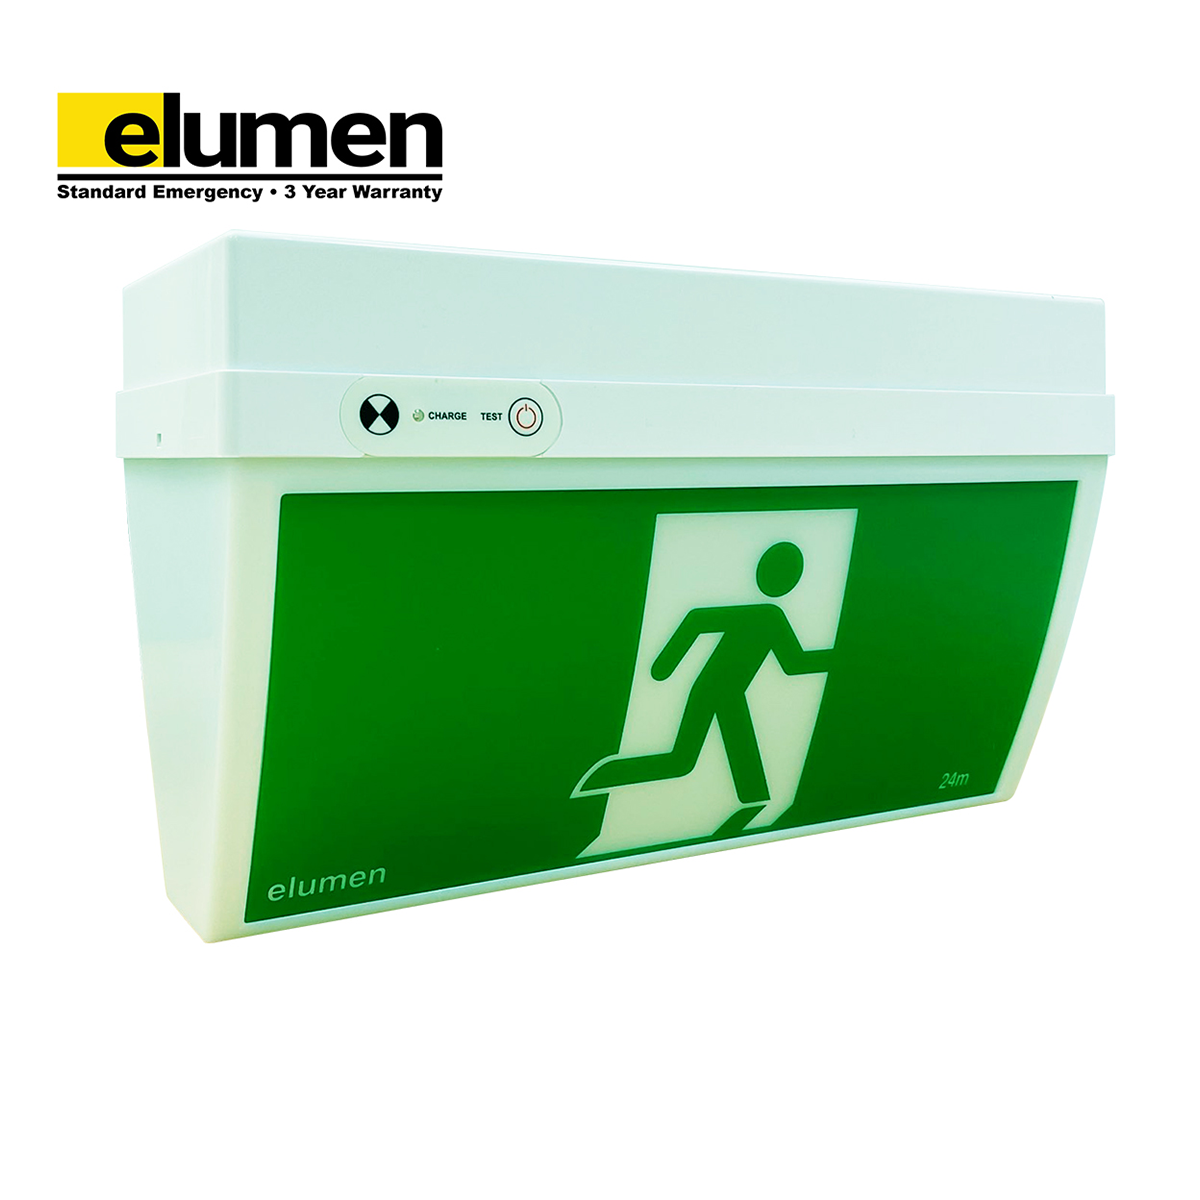 Ceiling mount diffuser to suit LED Wide Body Exit - Premium Exit & Emergency Lighting from elumen - Shop now at Firebox Australia